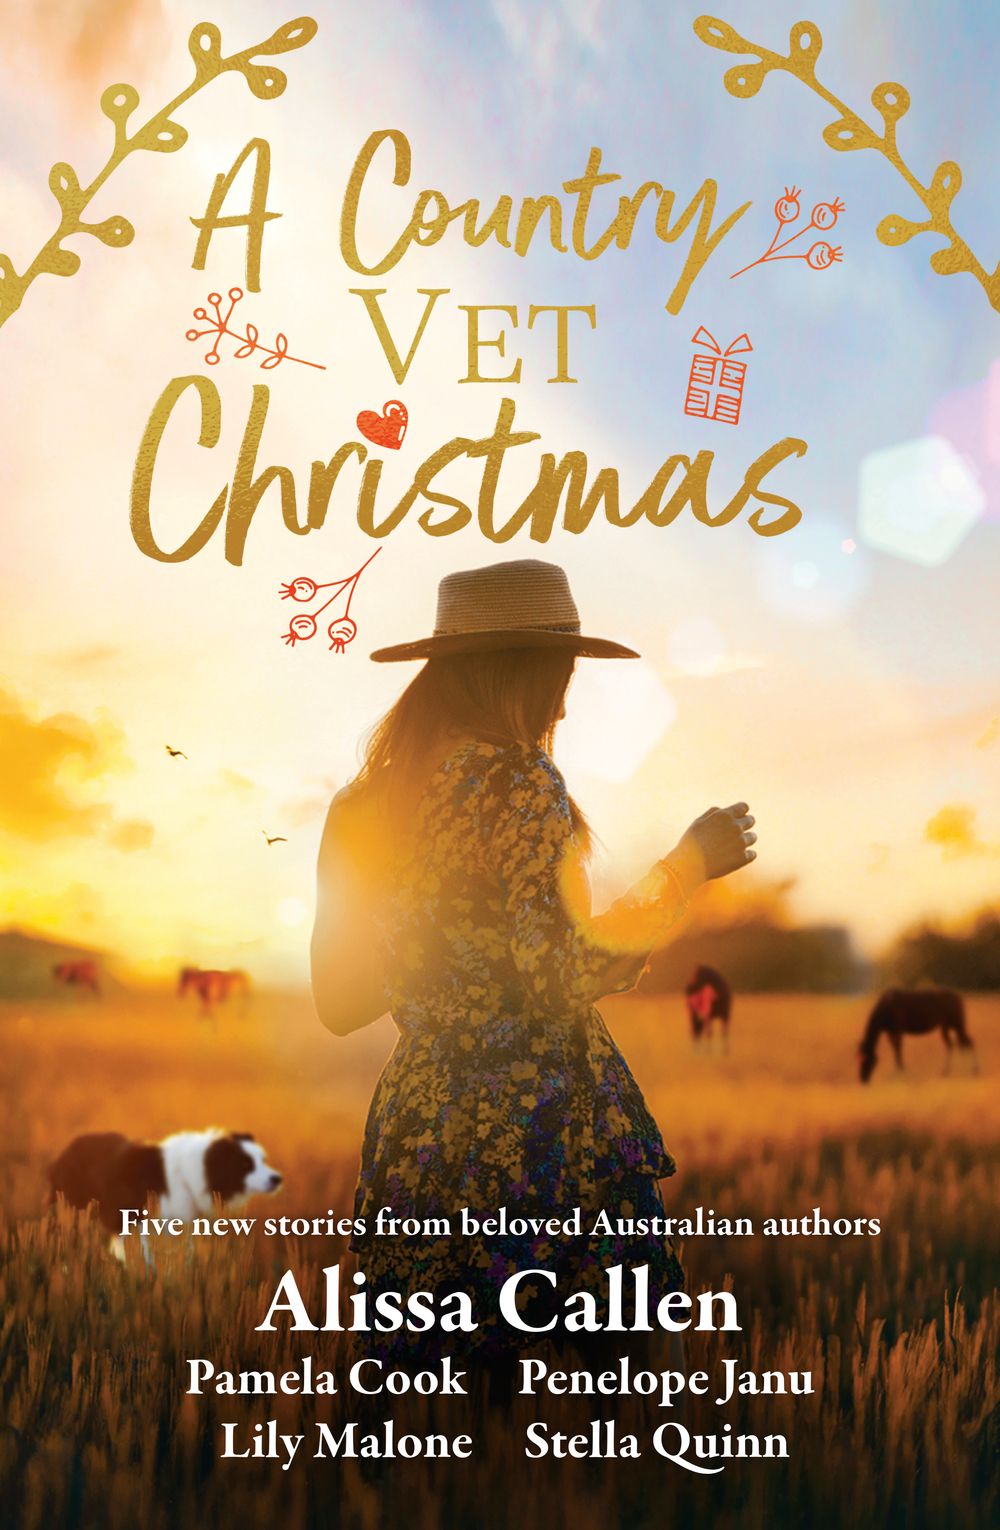 A Country Vet Christmas Collection